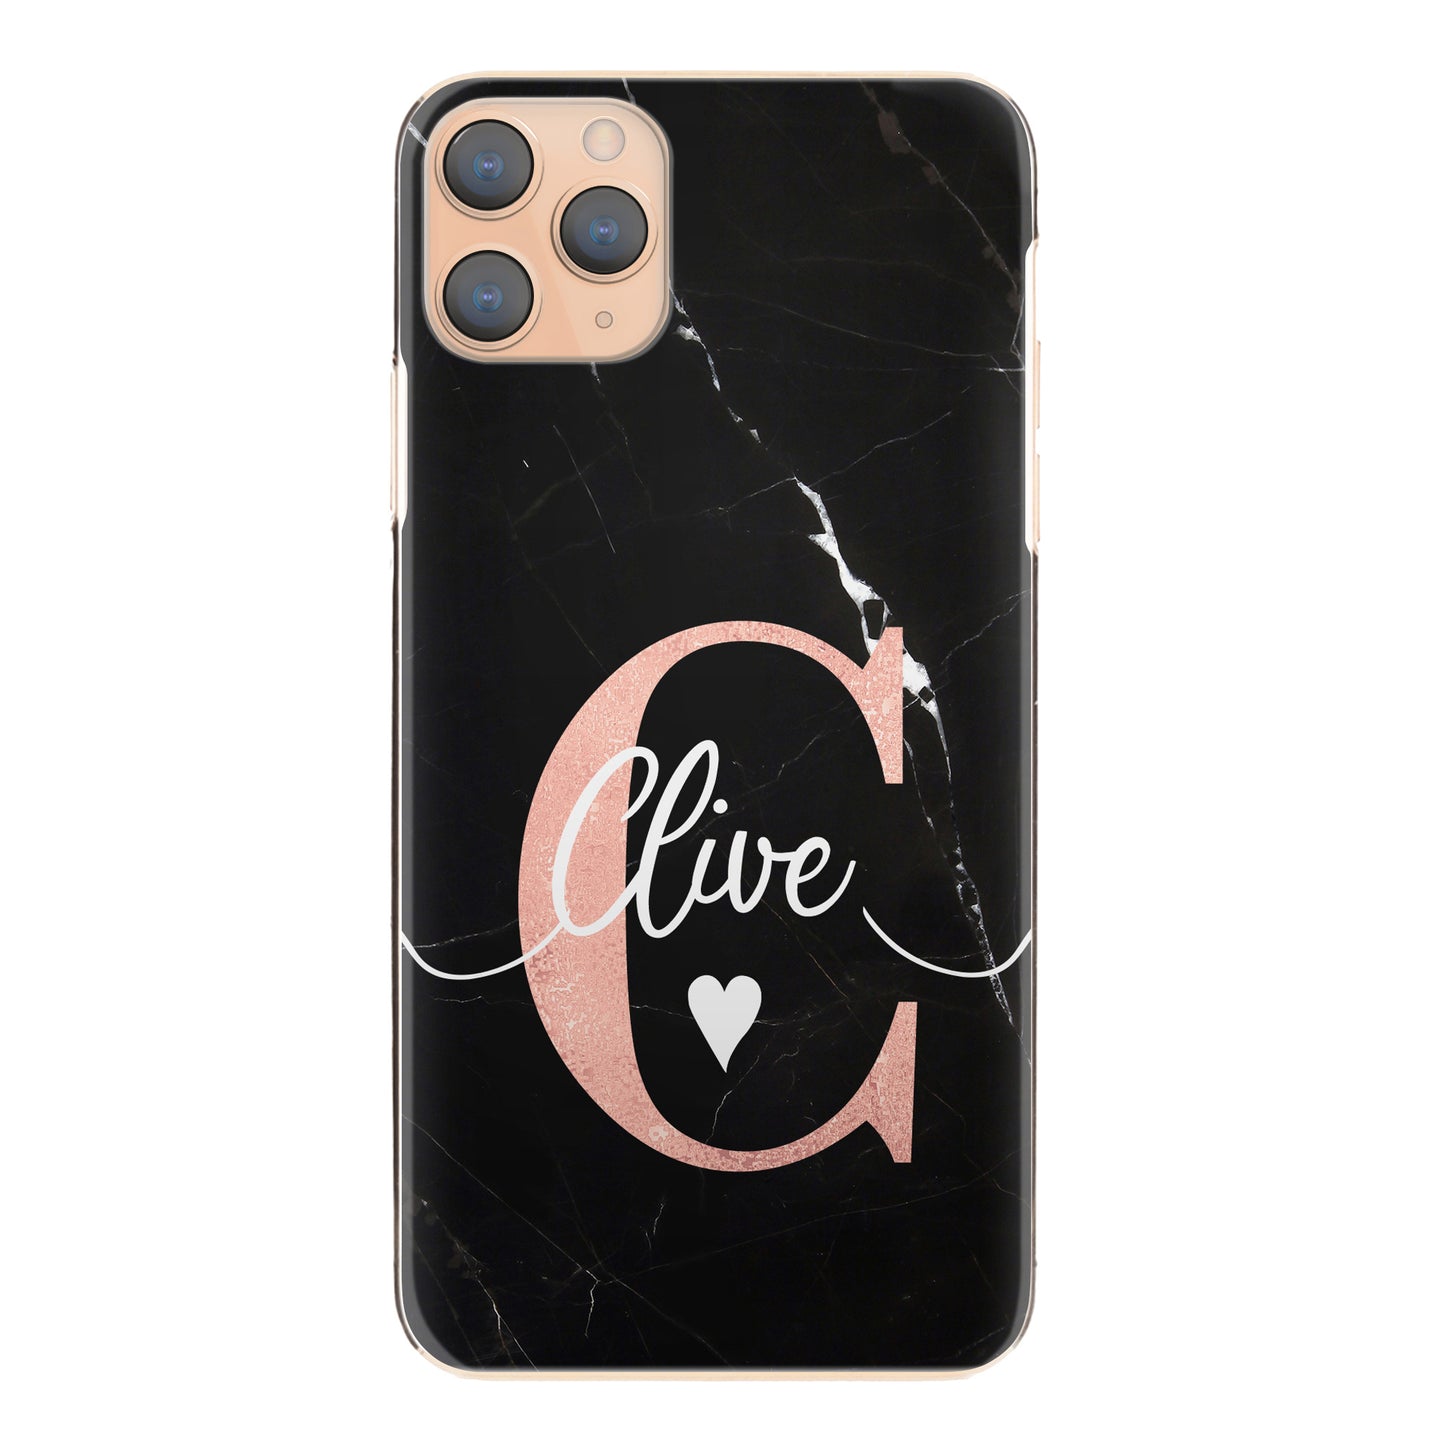 Personalised One Phone Hard Case with Stylish Heart Text and Pink Initial on White Infused Black Marble